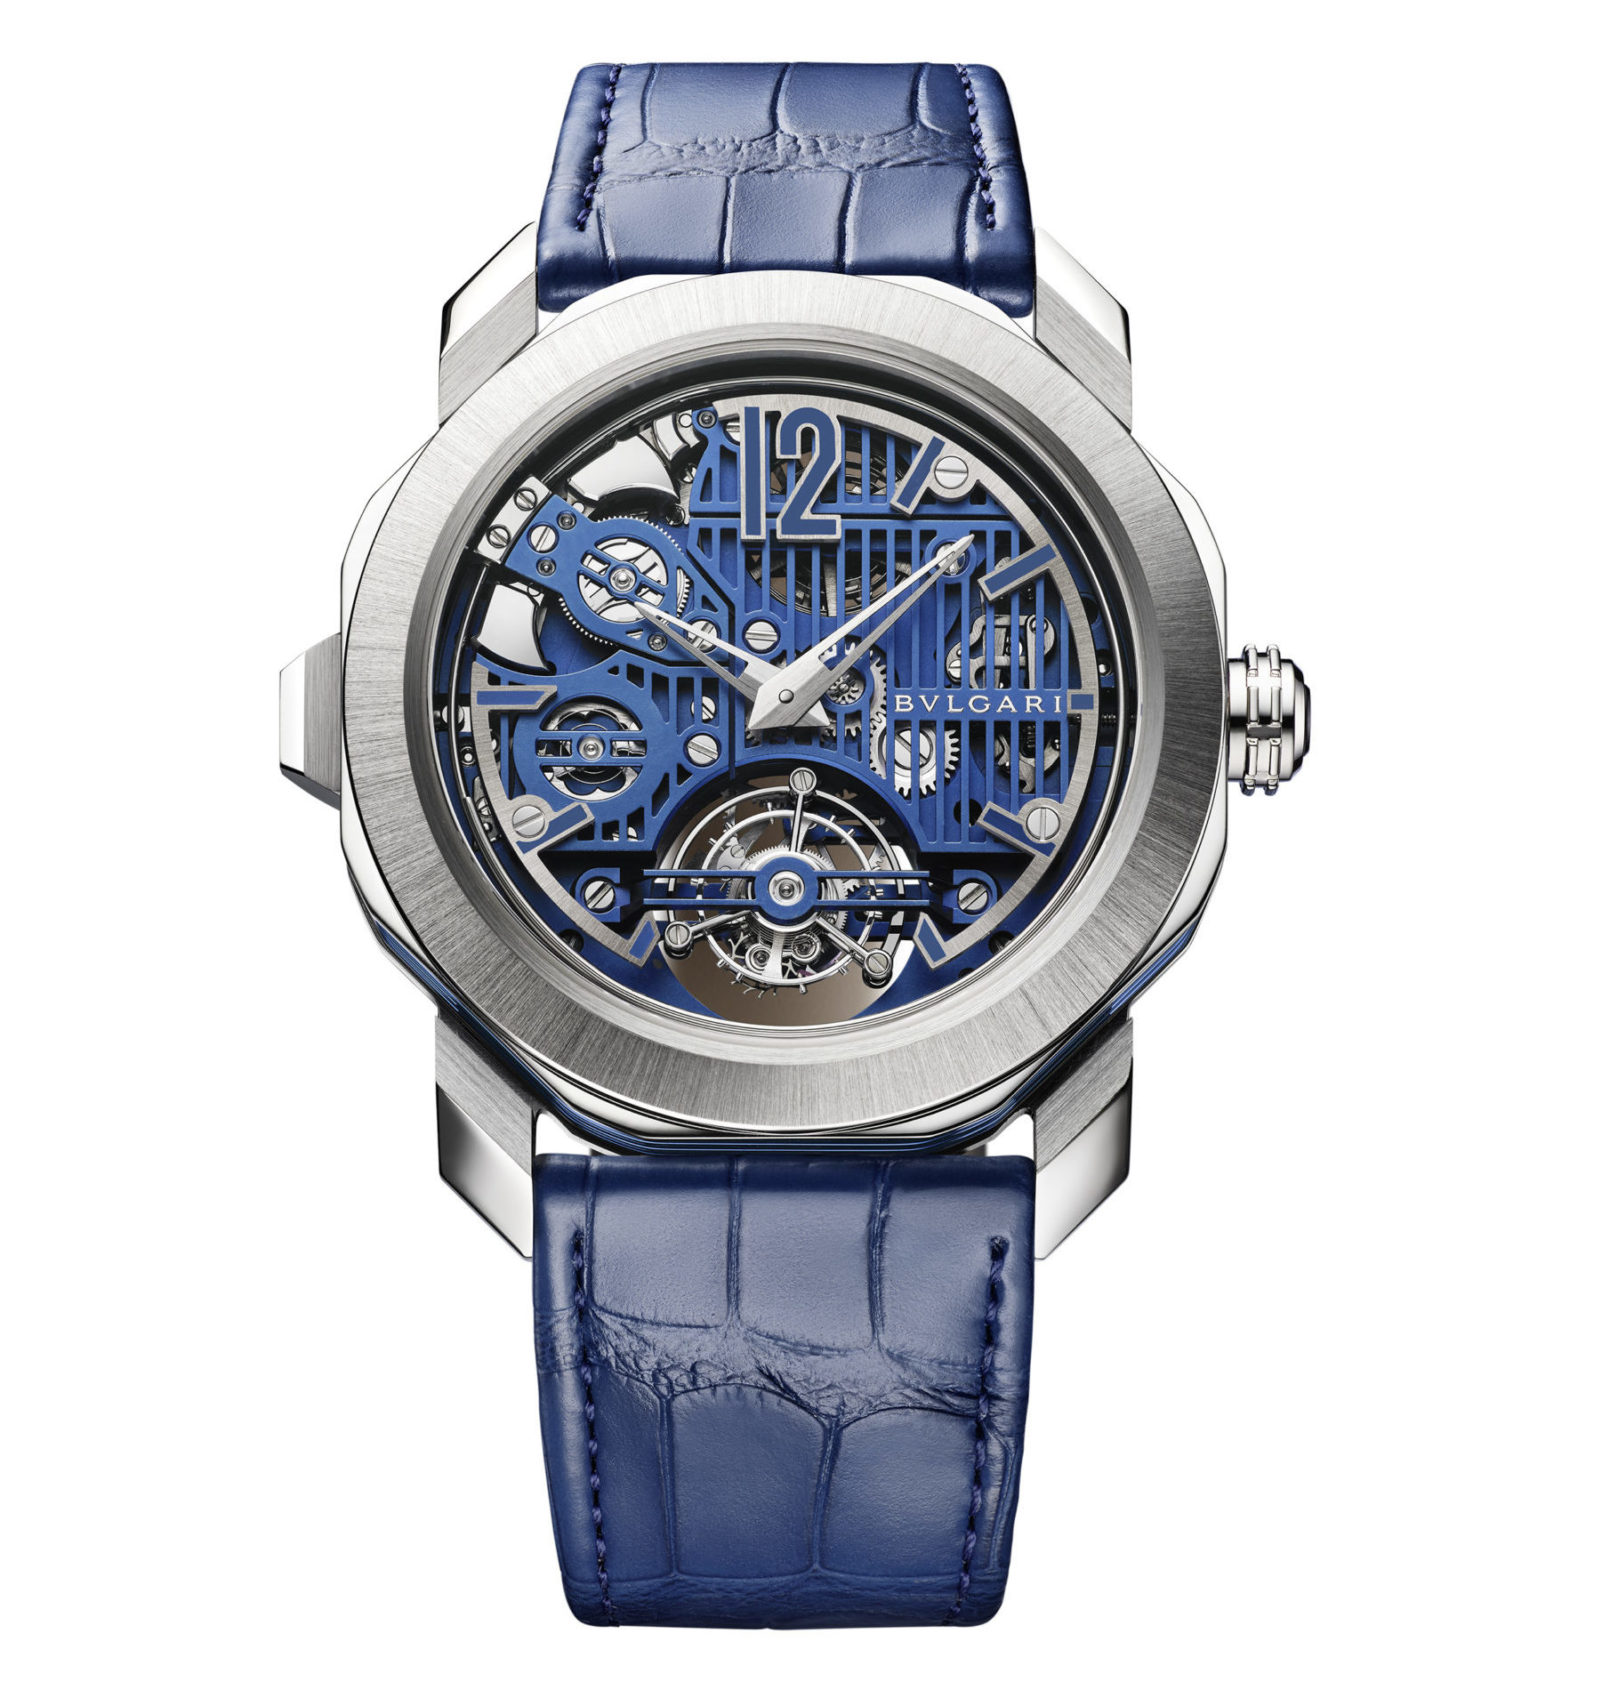 Bulgari flexes their mechanical mastery with two new Octo Roma models